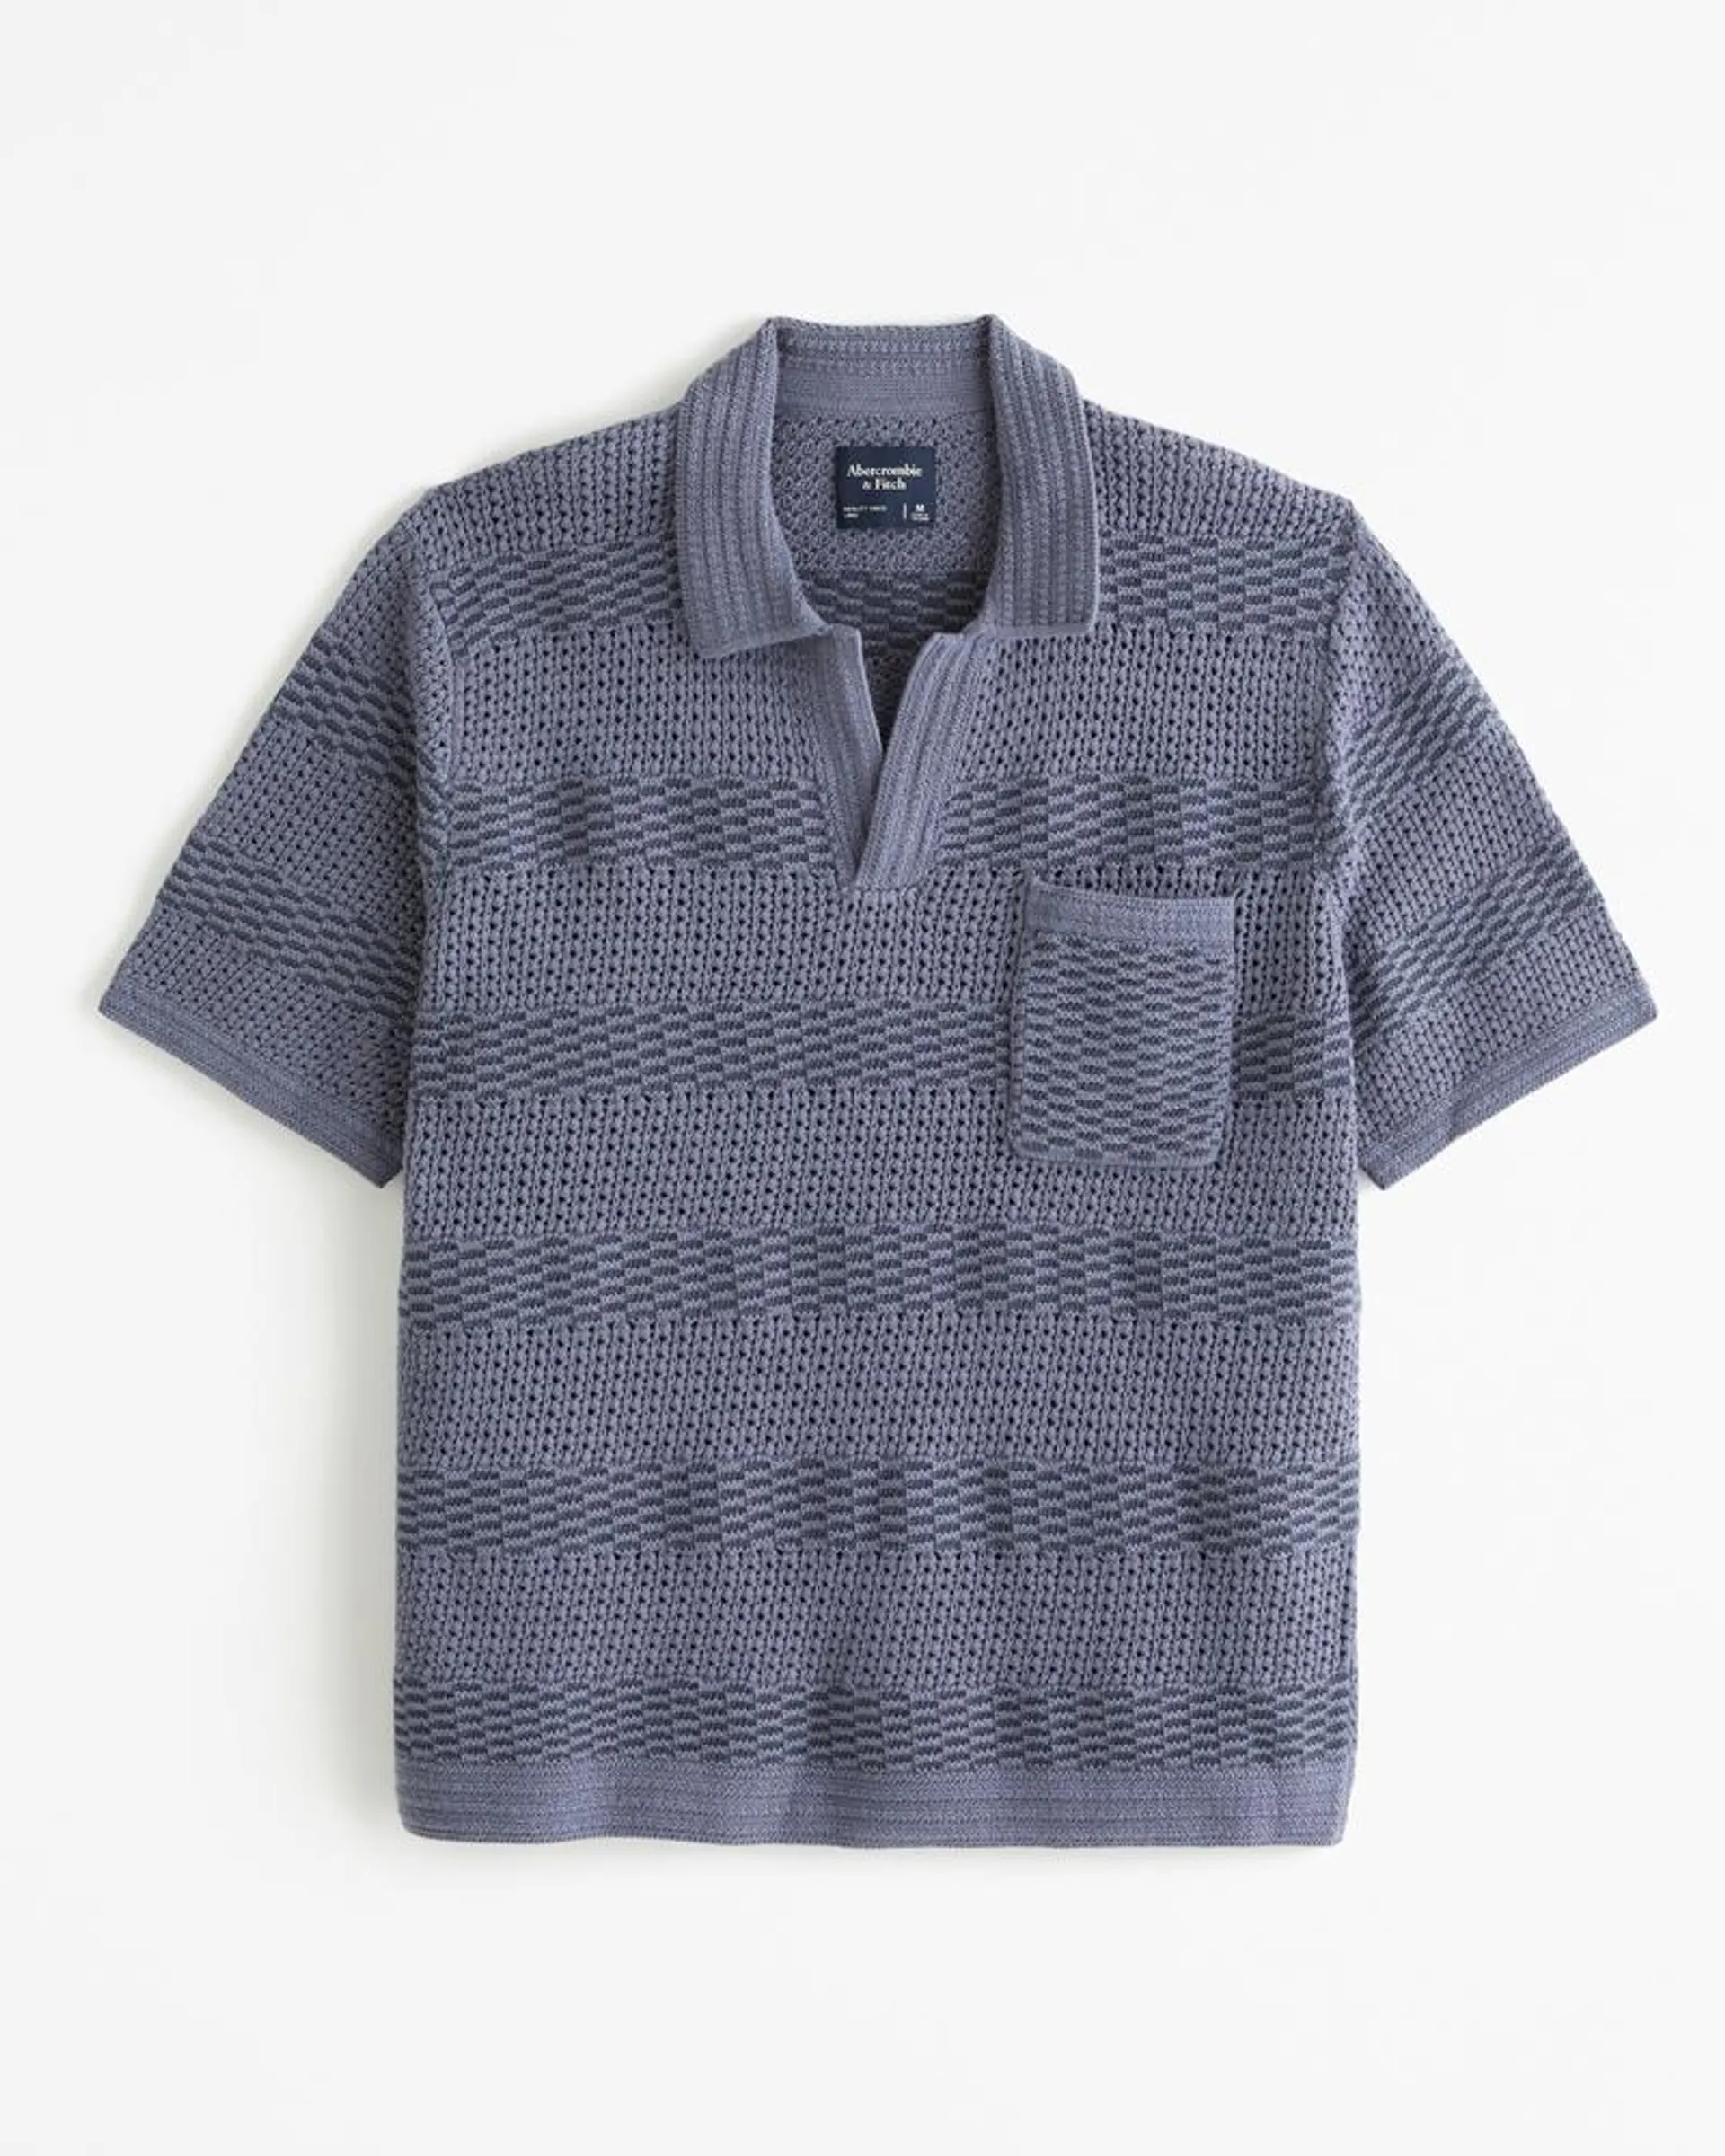 Striped Stitched Johnny Collar Sweater Polo